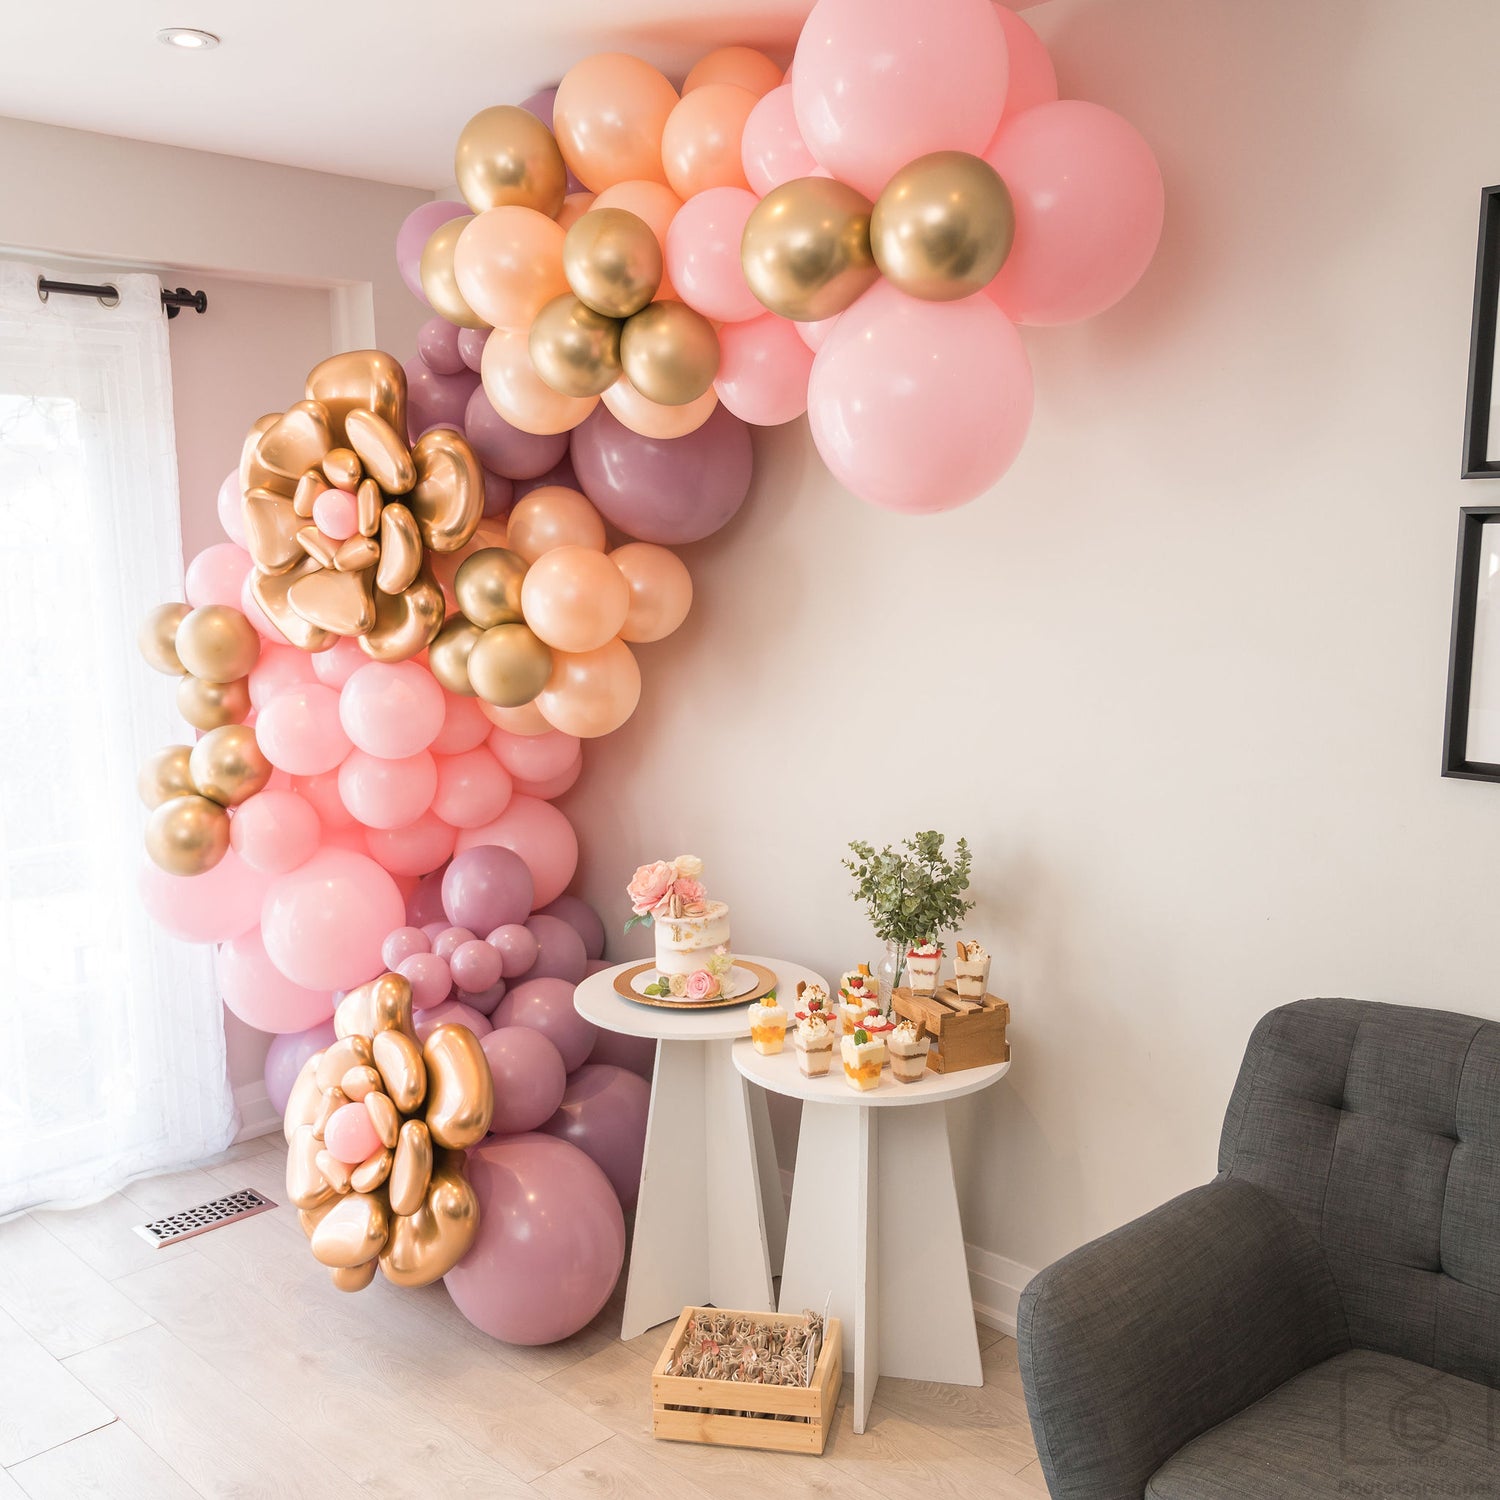 Pink, purple and gold balloon garland decorating a wall.